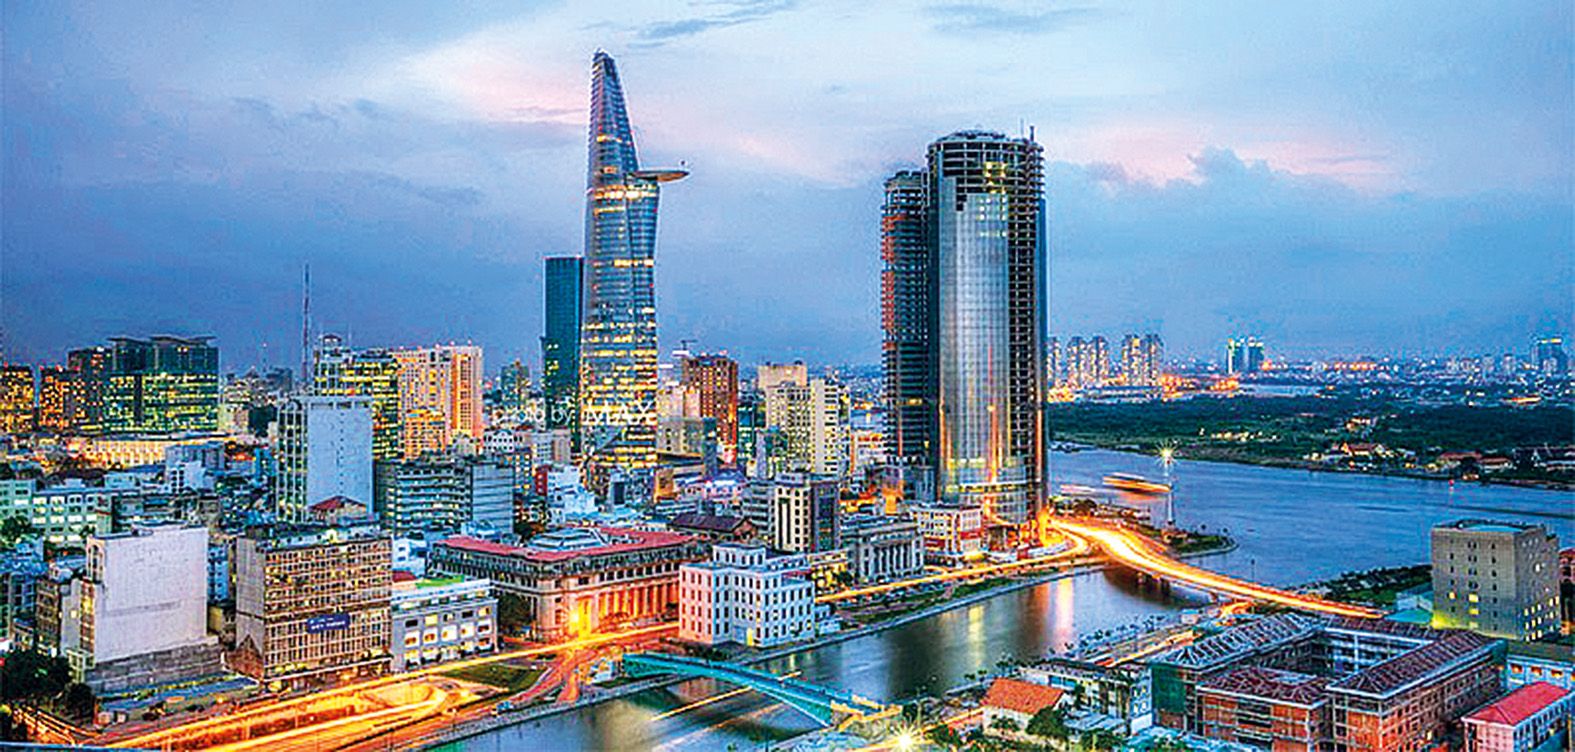 ho chi minh city possesses various potentials for becoming a financial center